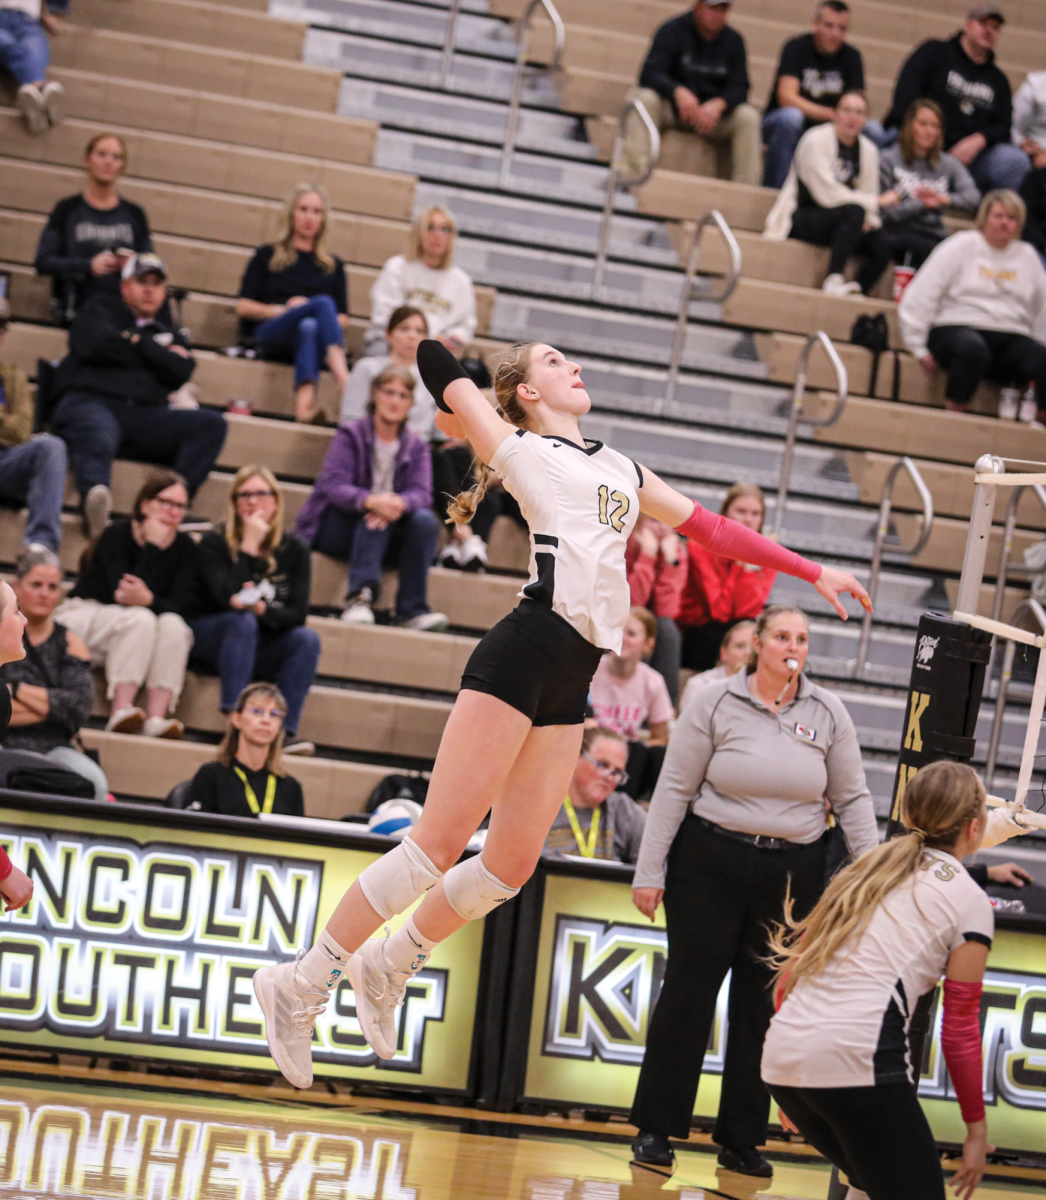 Natalie Wardlow jumps for her attack on the opposing team. 